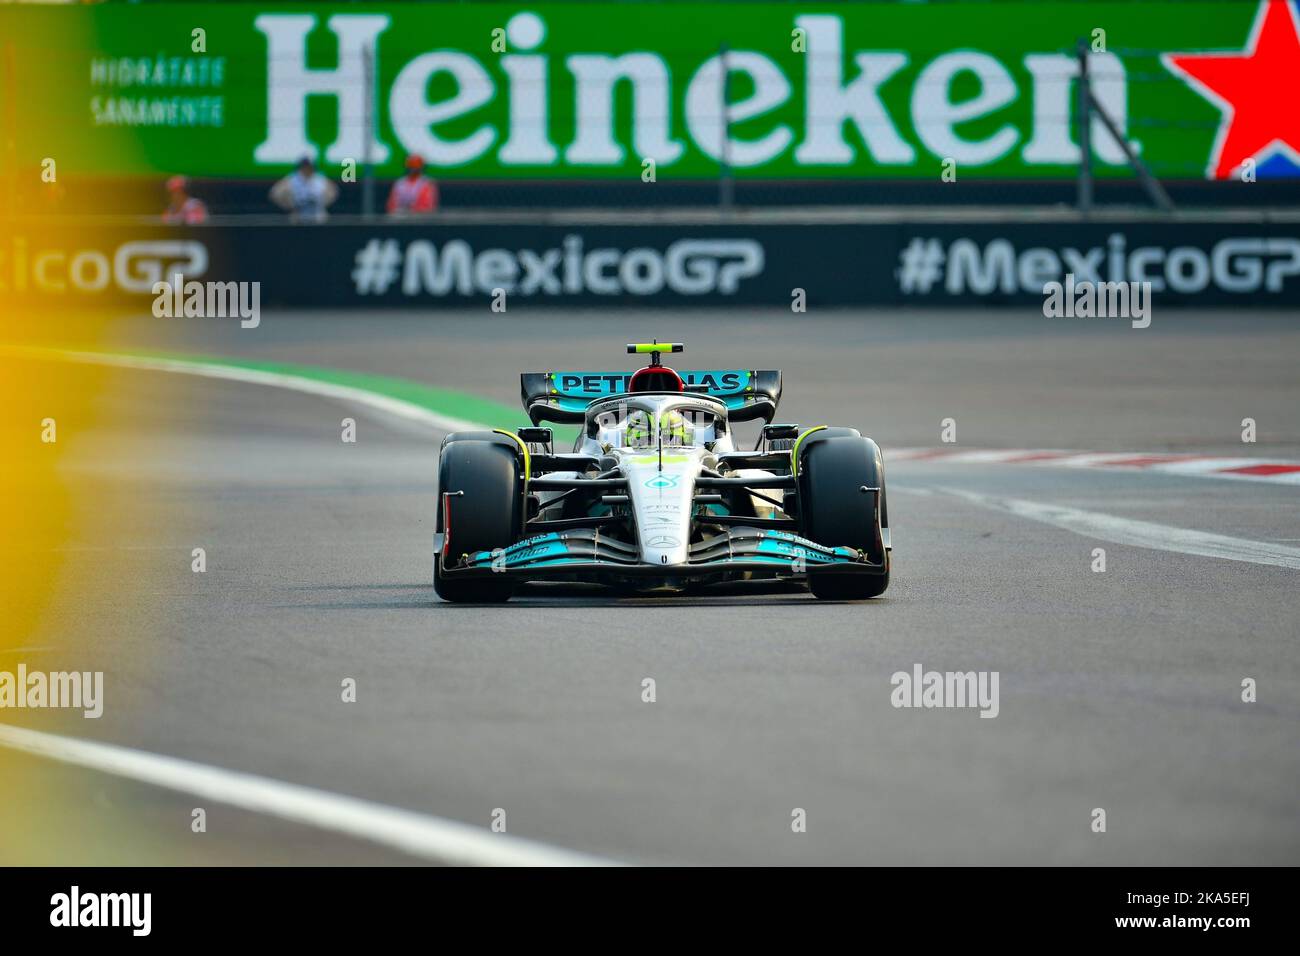 MEXICO City, MEXICO 28. October 2022: Lewis Hamilton of Great Britain (N-44) Mercedes AMG Petronas F1 Team W13 during practice 2 Day prior to the Formula 1 Grand Prix of Mexico 2022, at Autodromo Hermanos Rodriguez, on October 28, 2022. SPANISH TEXT - followed by English Lewis Hamilton de Gran Bretana (N-44) Mercedes AMG Petronas F1 Team W13 durante el dia de practicas 2 previo al Gran Premio de Mexico de la Formula 1 2022, en el Autodromo Hermanos Rodriguez, el 28 de Octubre de 2022. F1 Grand Prix held in the Magdalena Mixhuca Park in the Autodromo Hernando Rodriguez, Formula 1 Grand Pr Stock Photo